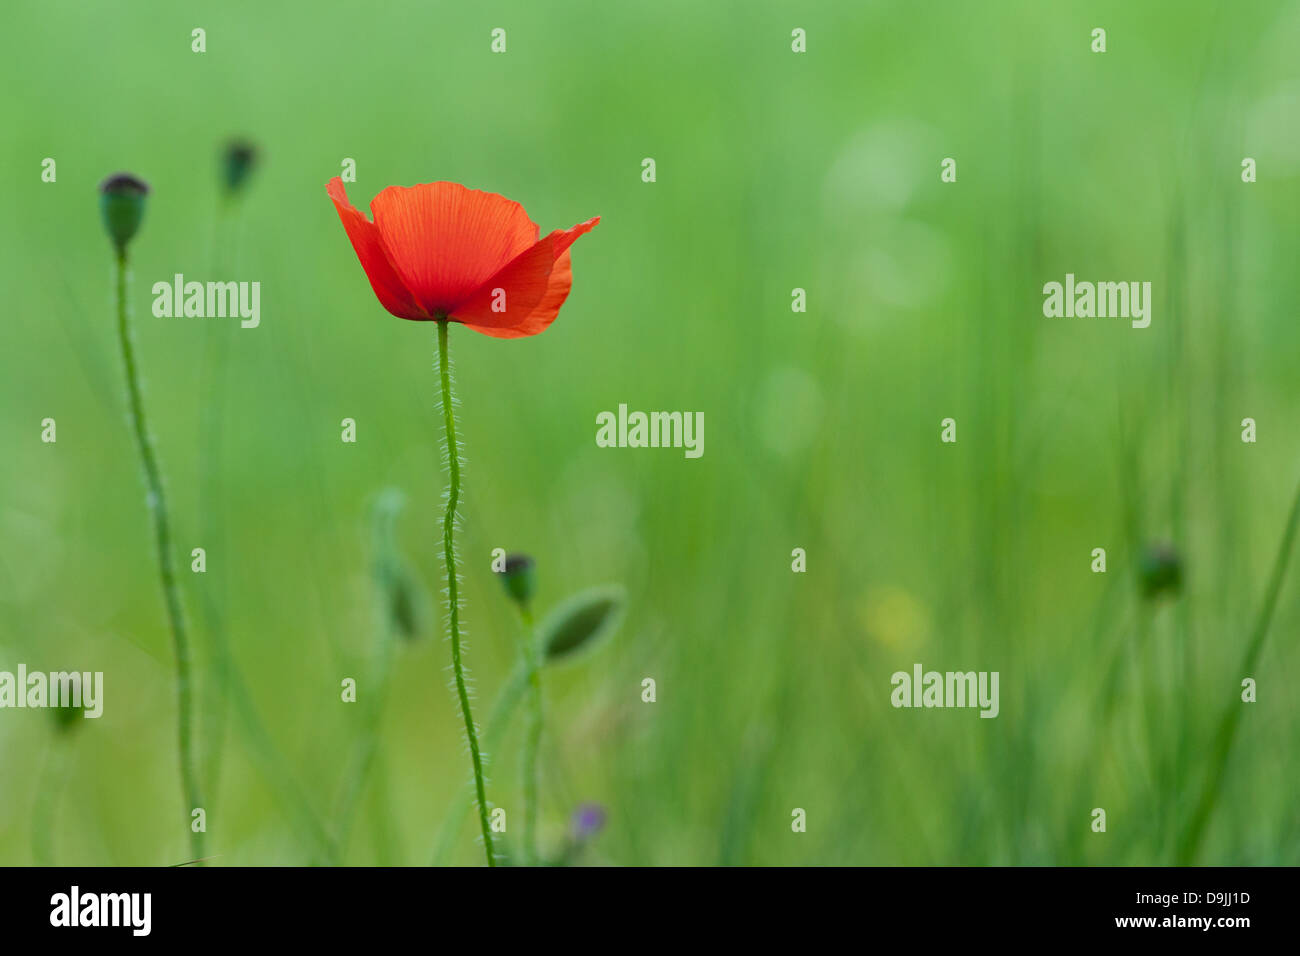 Photograph of a single red poppy shot against a blurred green field for a background. Stock Photo